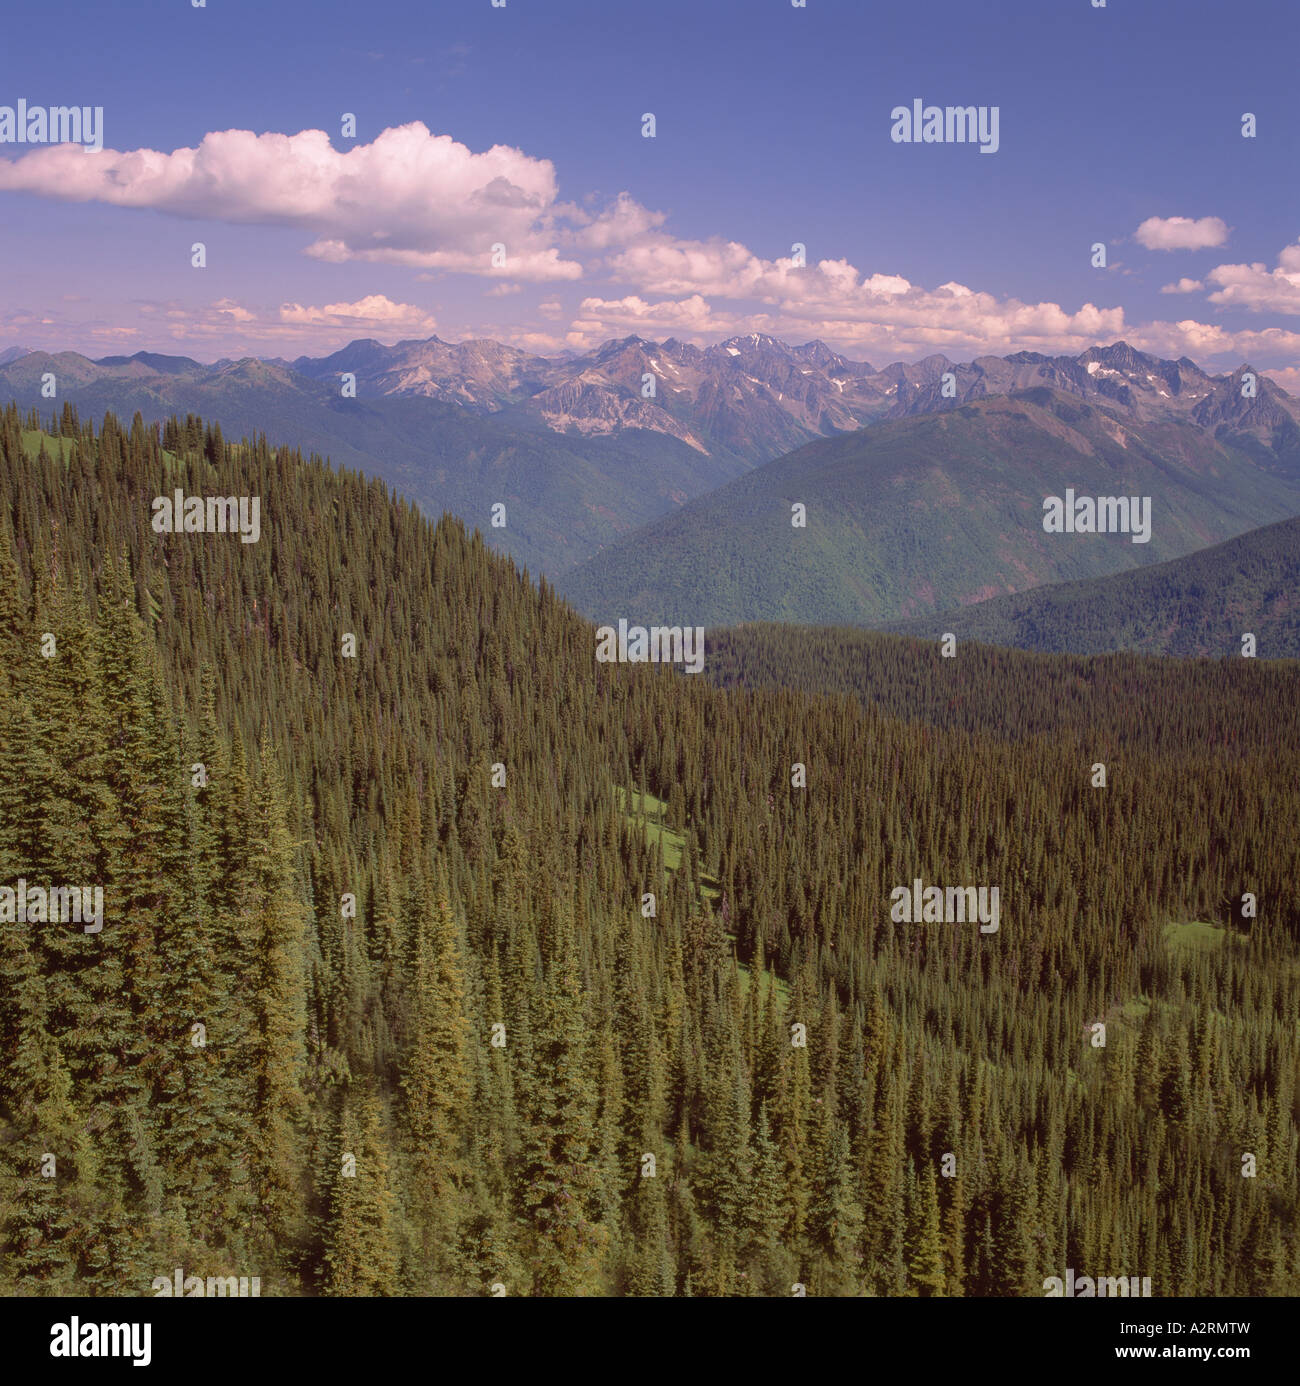 Mixed Coniferous Forests in the Selkirk Mountains in the Kootenay Region of British Columbia Canada Stock Photo